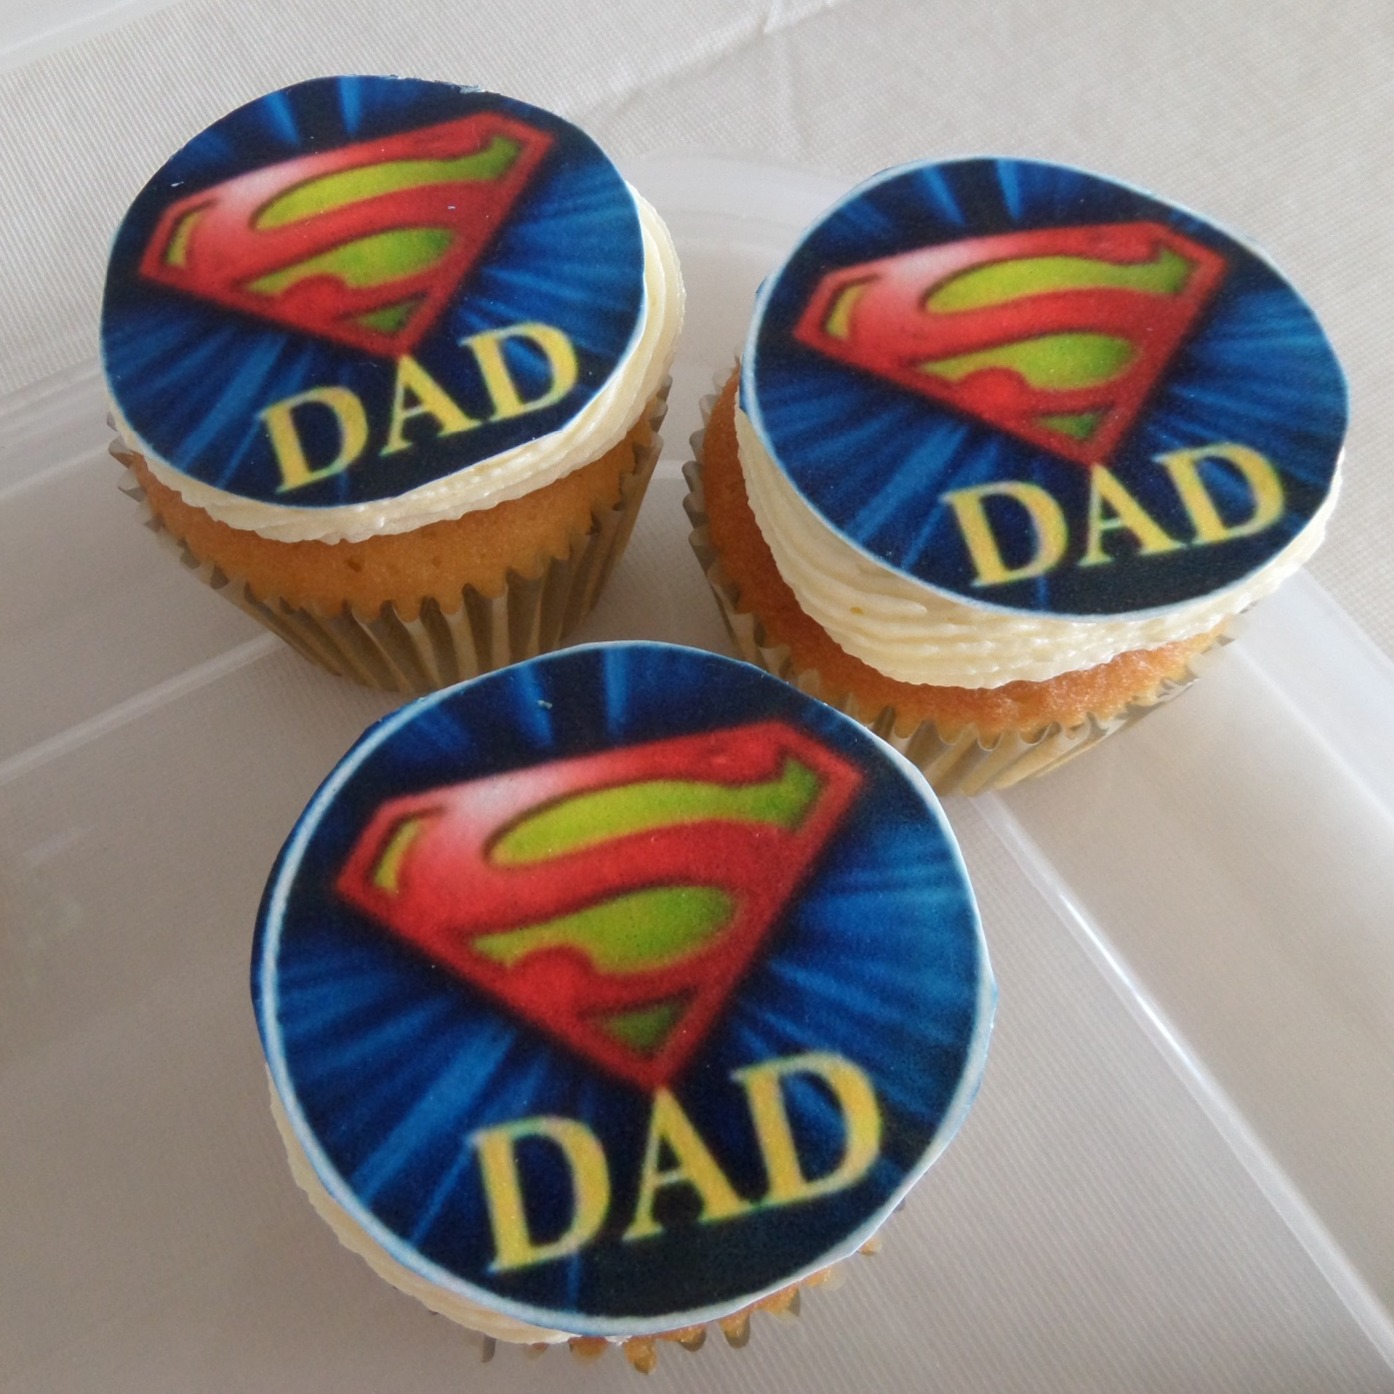 Super dad /fathers day cupcakes